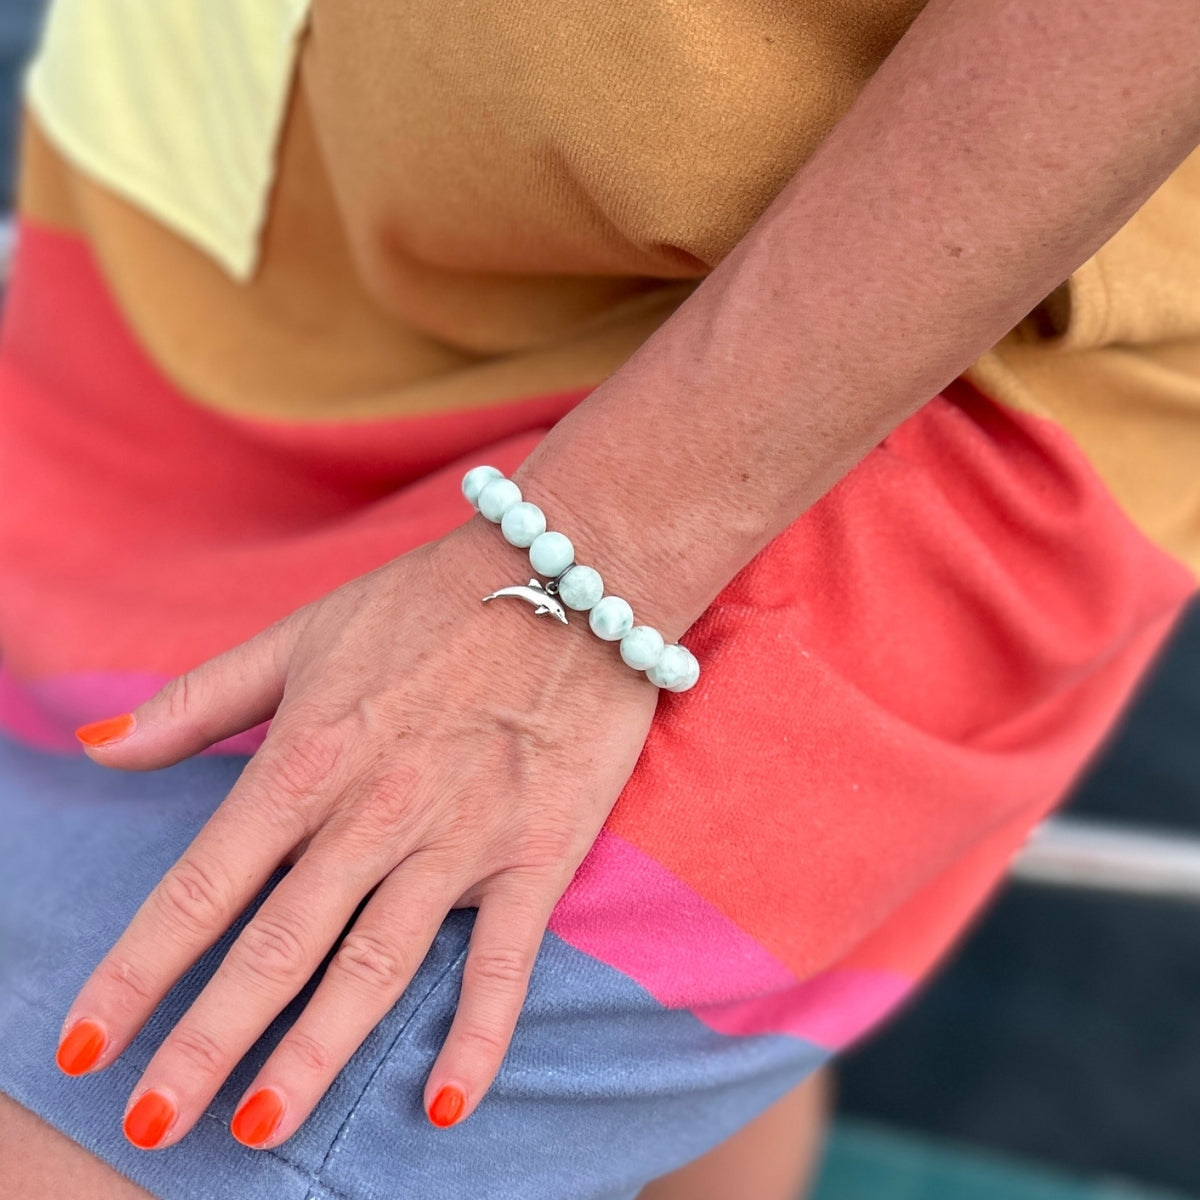 Whether you're a beach lover seeking a touch of coastal magic or a spiritual seeker embracing the tranquility of the ocean, the Dolphin Spirit Bracelet is sure to inspire and uplift your soul.